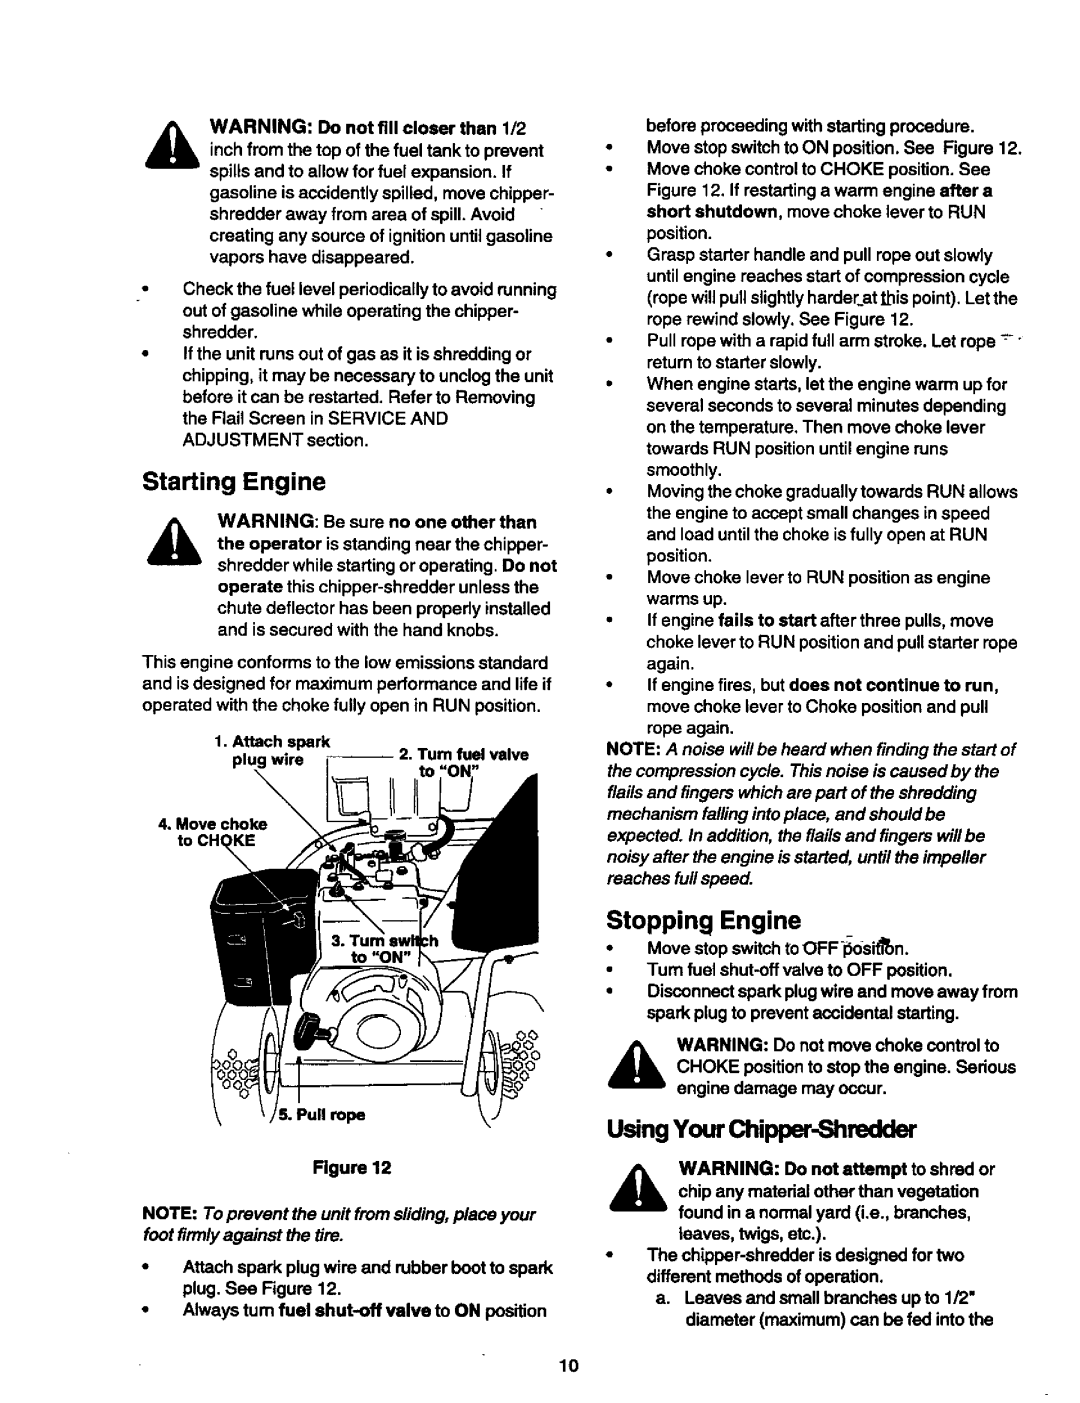 Craftsman 247.775890 manual Stopping Engine, Starting Engine, Using Your Chipper-Shredder 